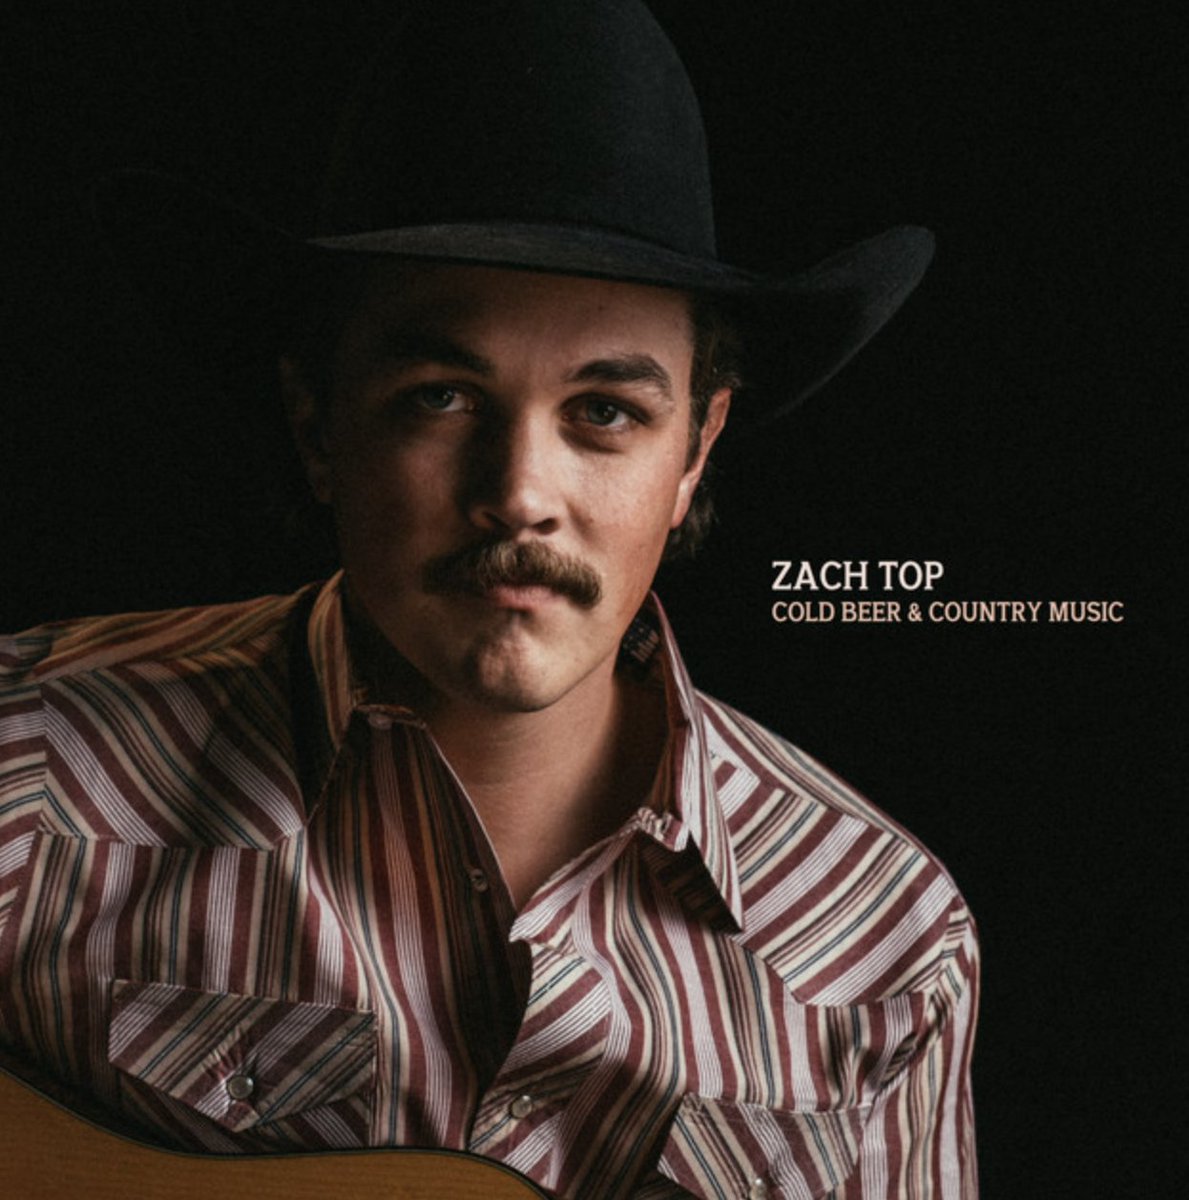 Have you listened to Zach Top's new one? Anyone seen him live?